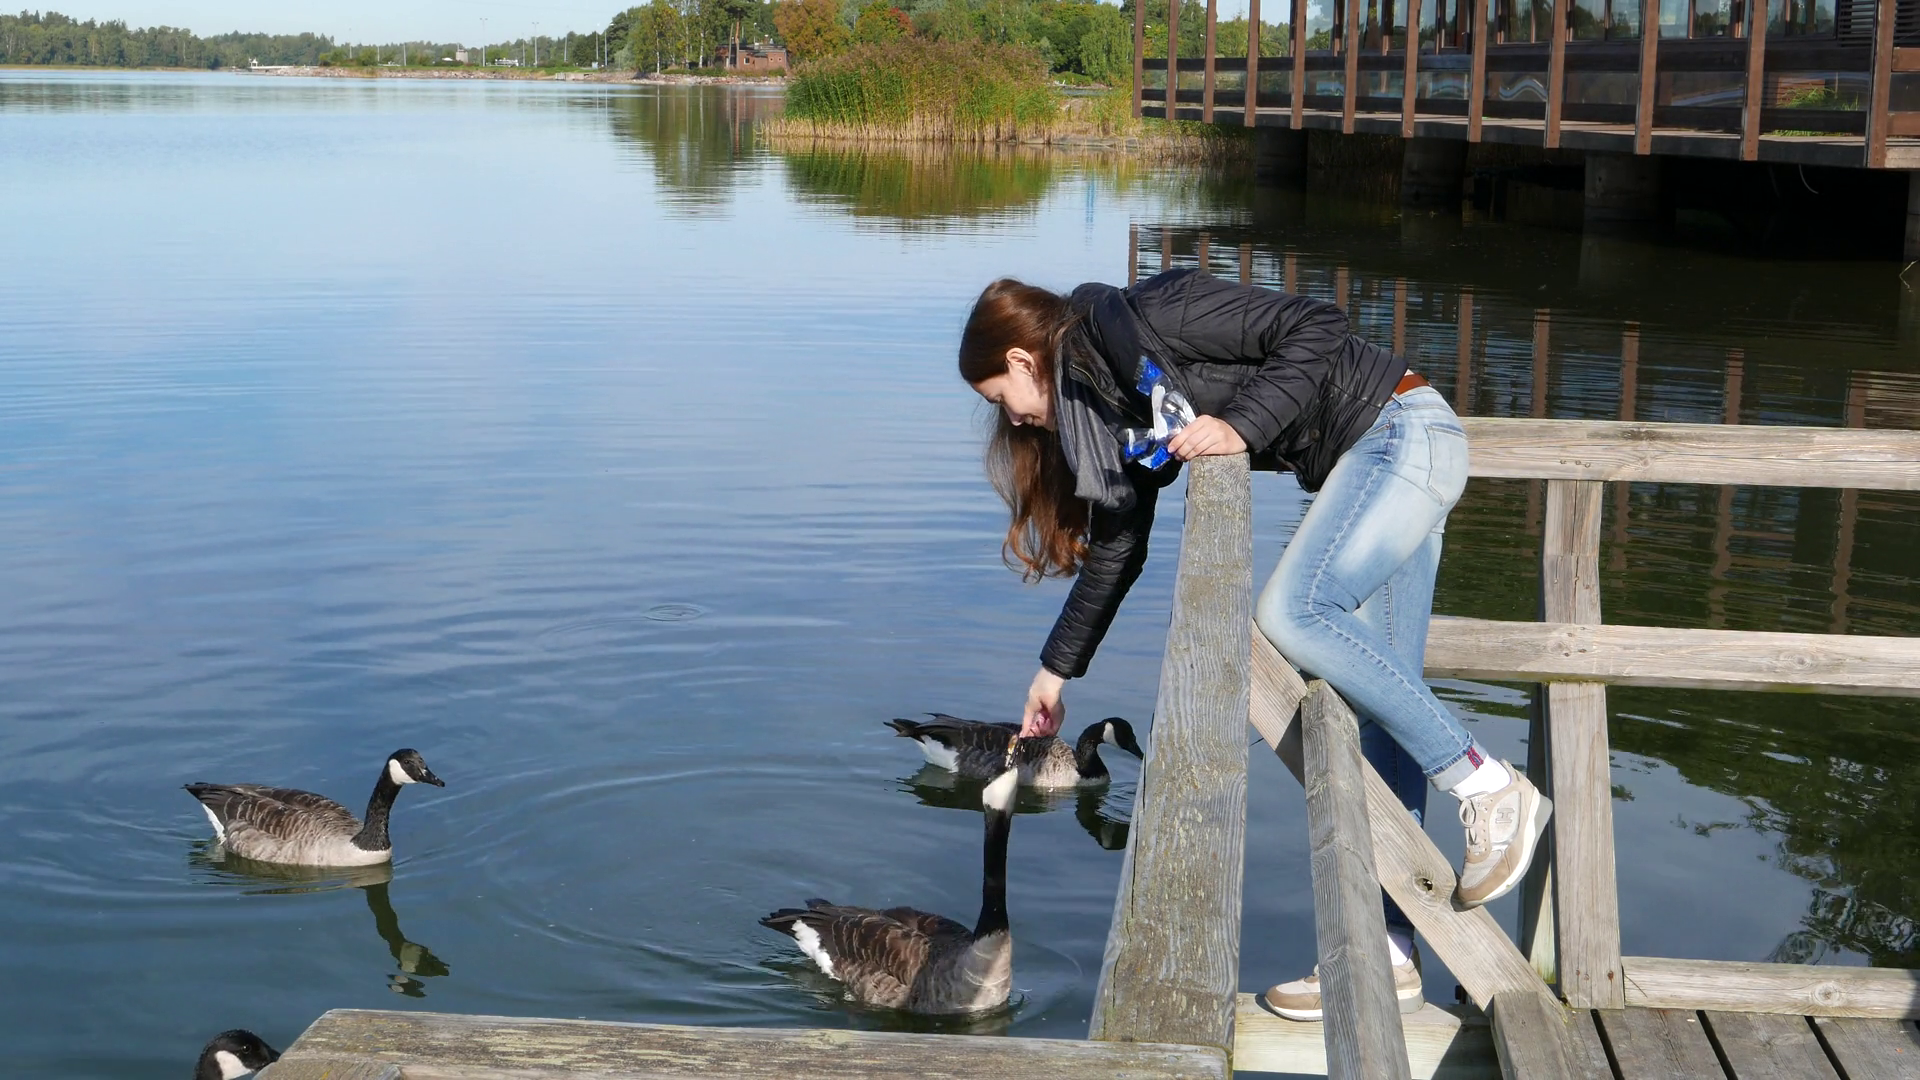 Young woman feed wild geese at lake, one birt peck food from hand ...